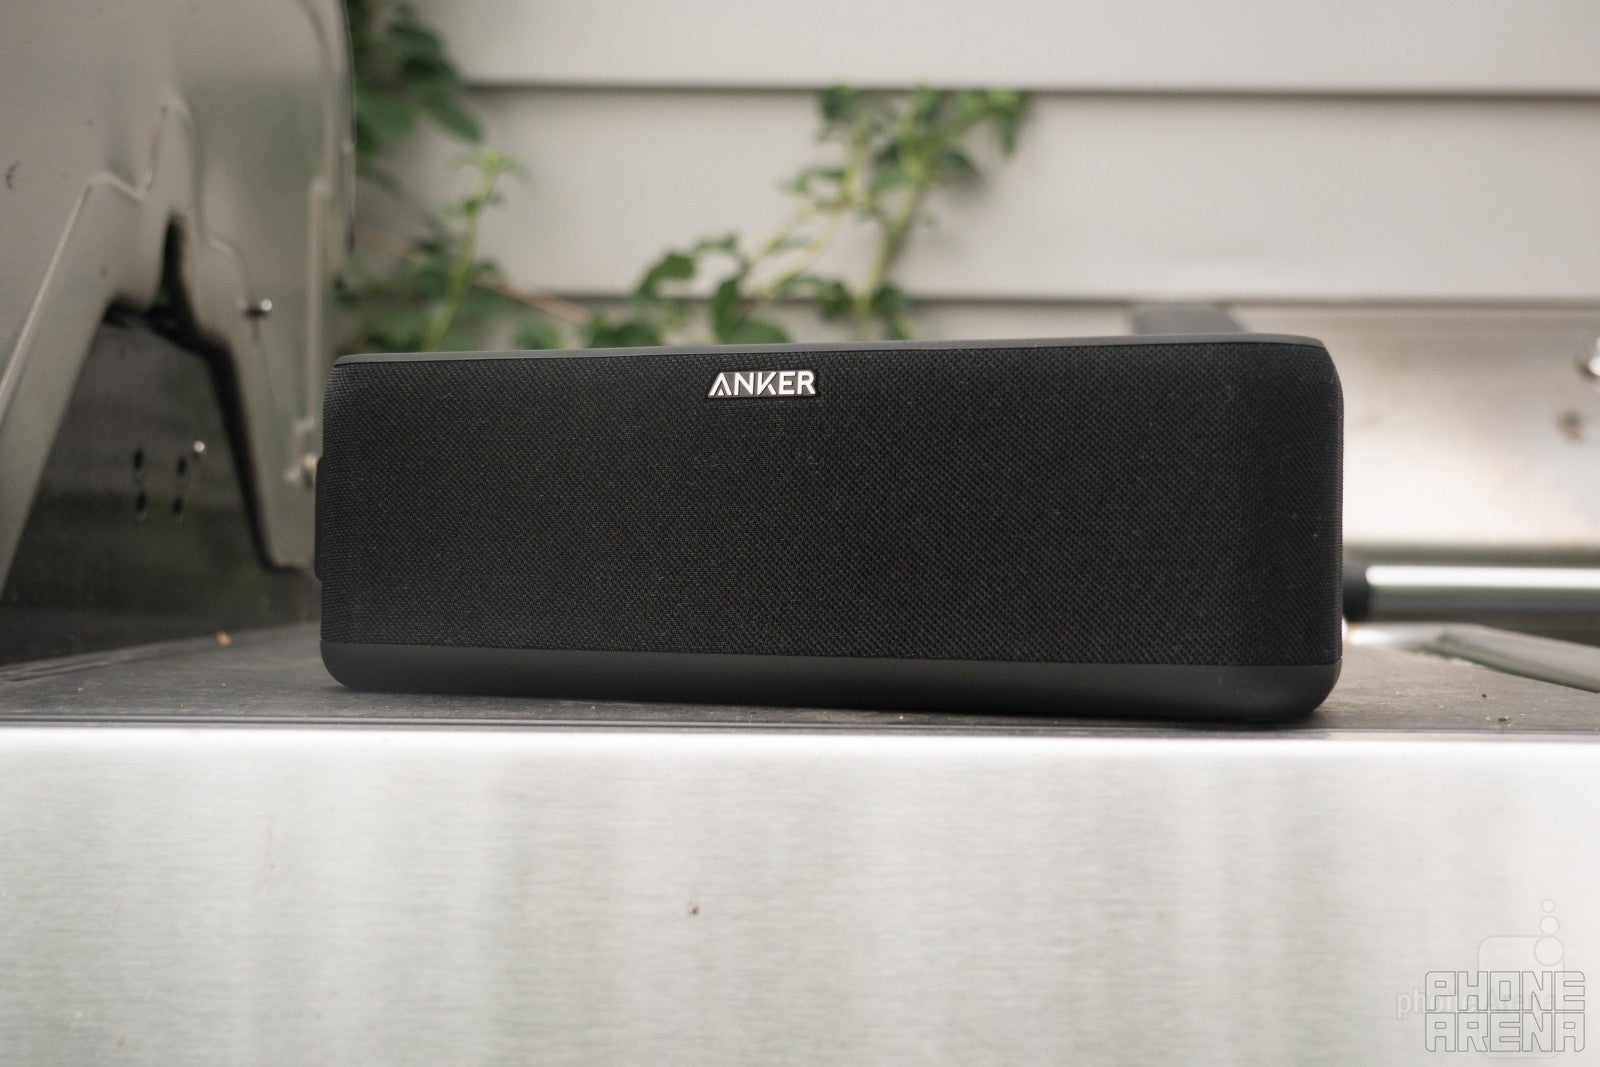 Design Criticism: How Rugged Can This Rugged Wireless Speaker Be